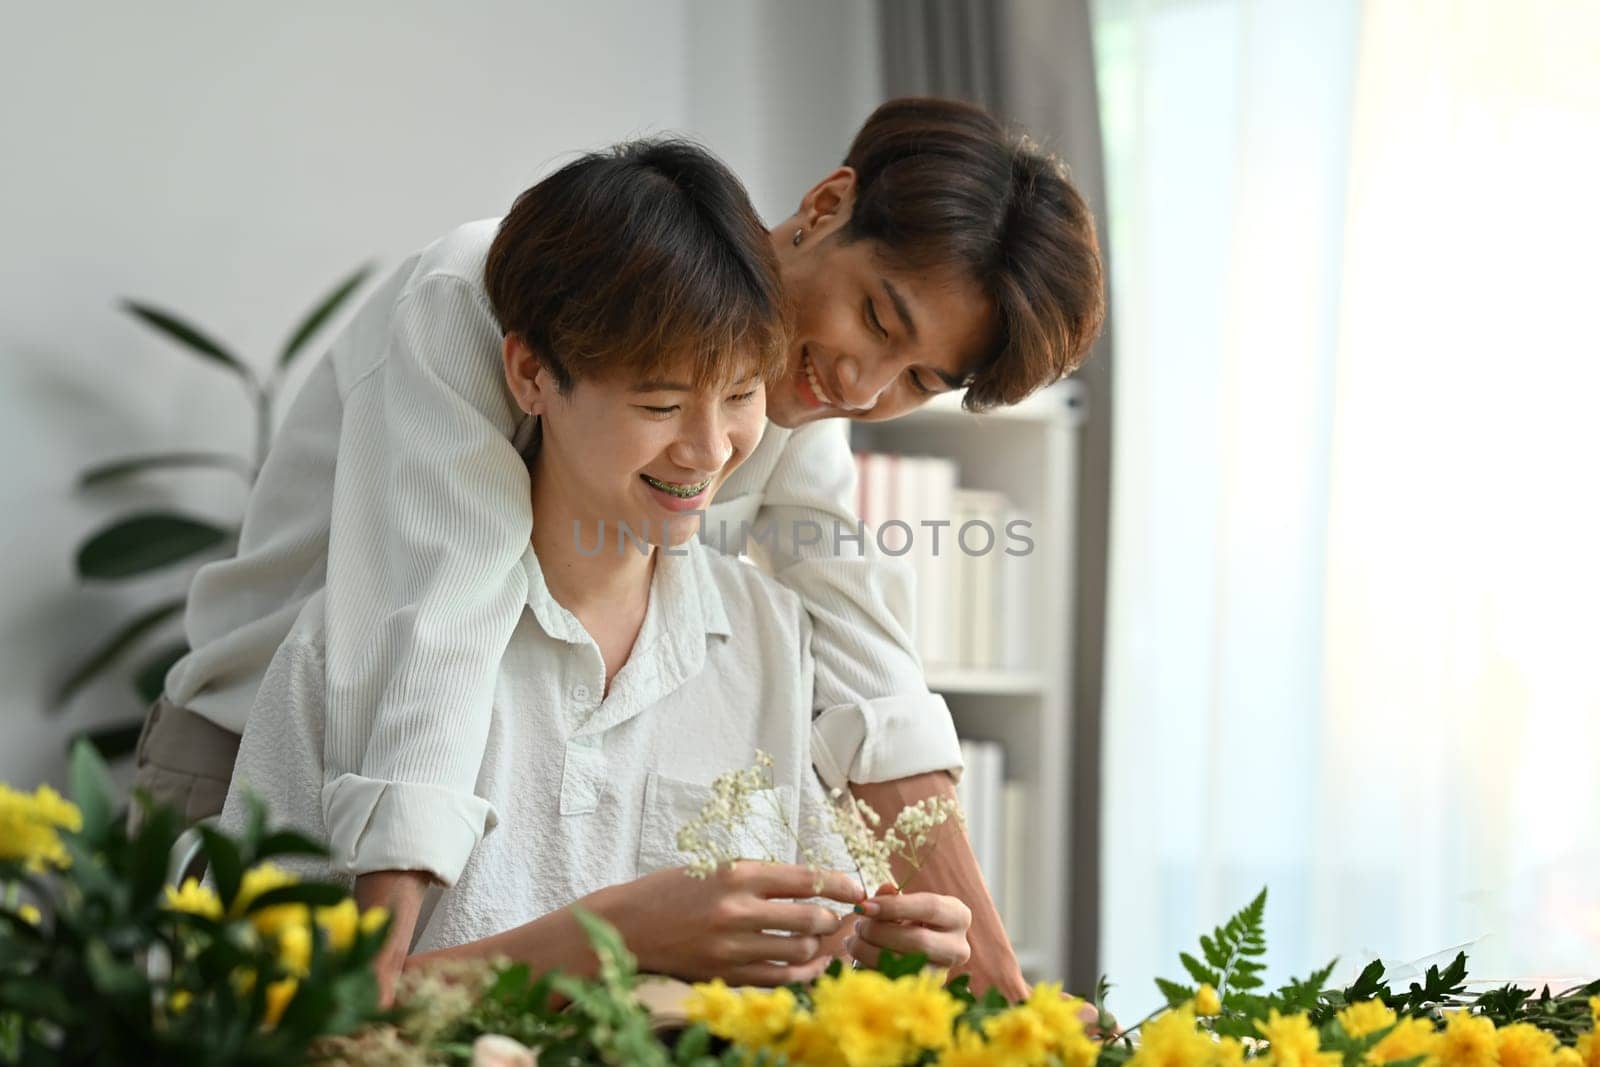 Homosexual, LGBT and relationships. Joyful male gay couple spending time together, enjoying arranging flowers in cozy home by prathanchorruangsak